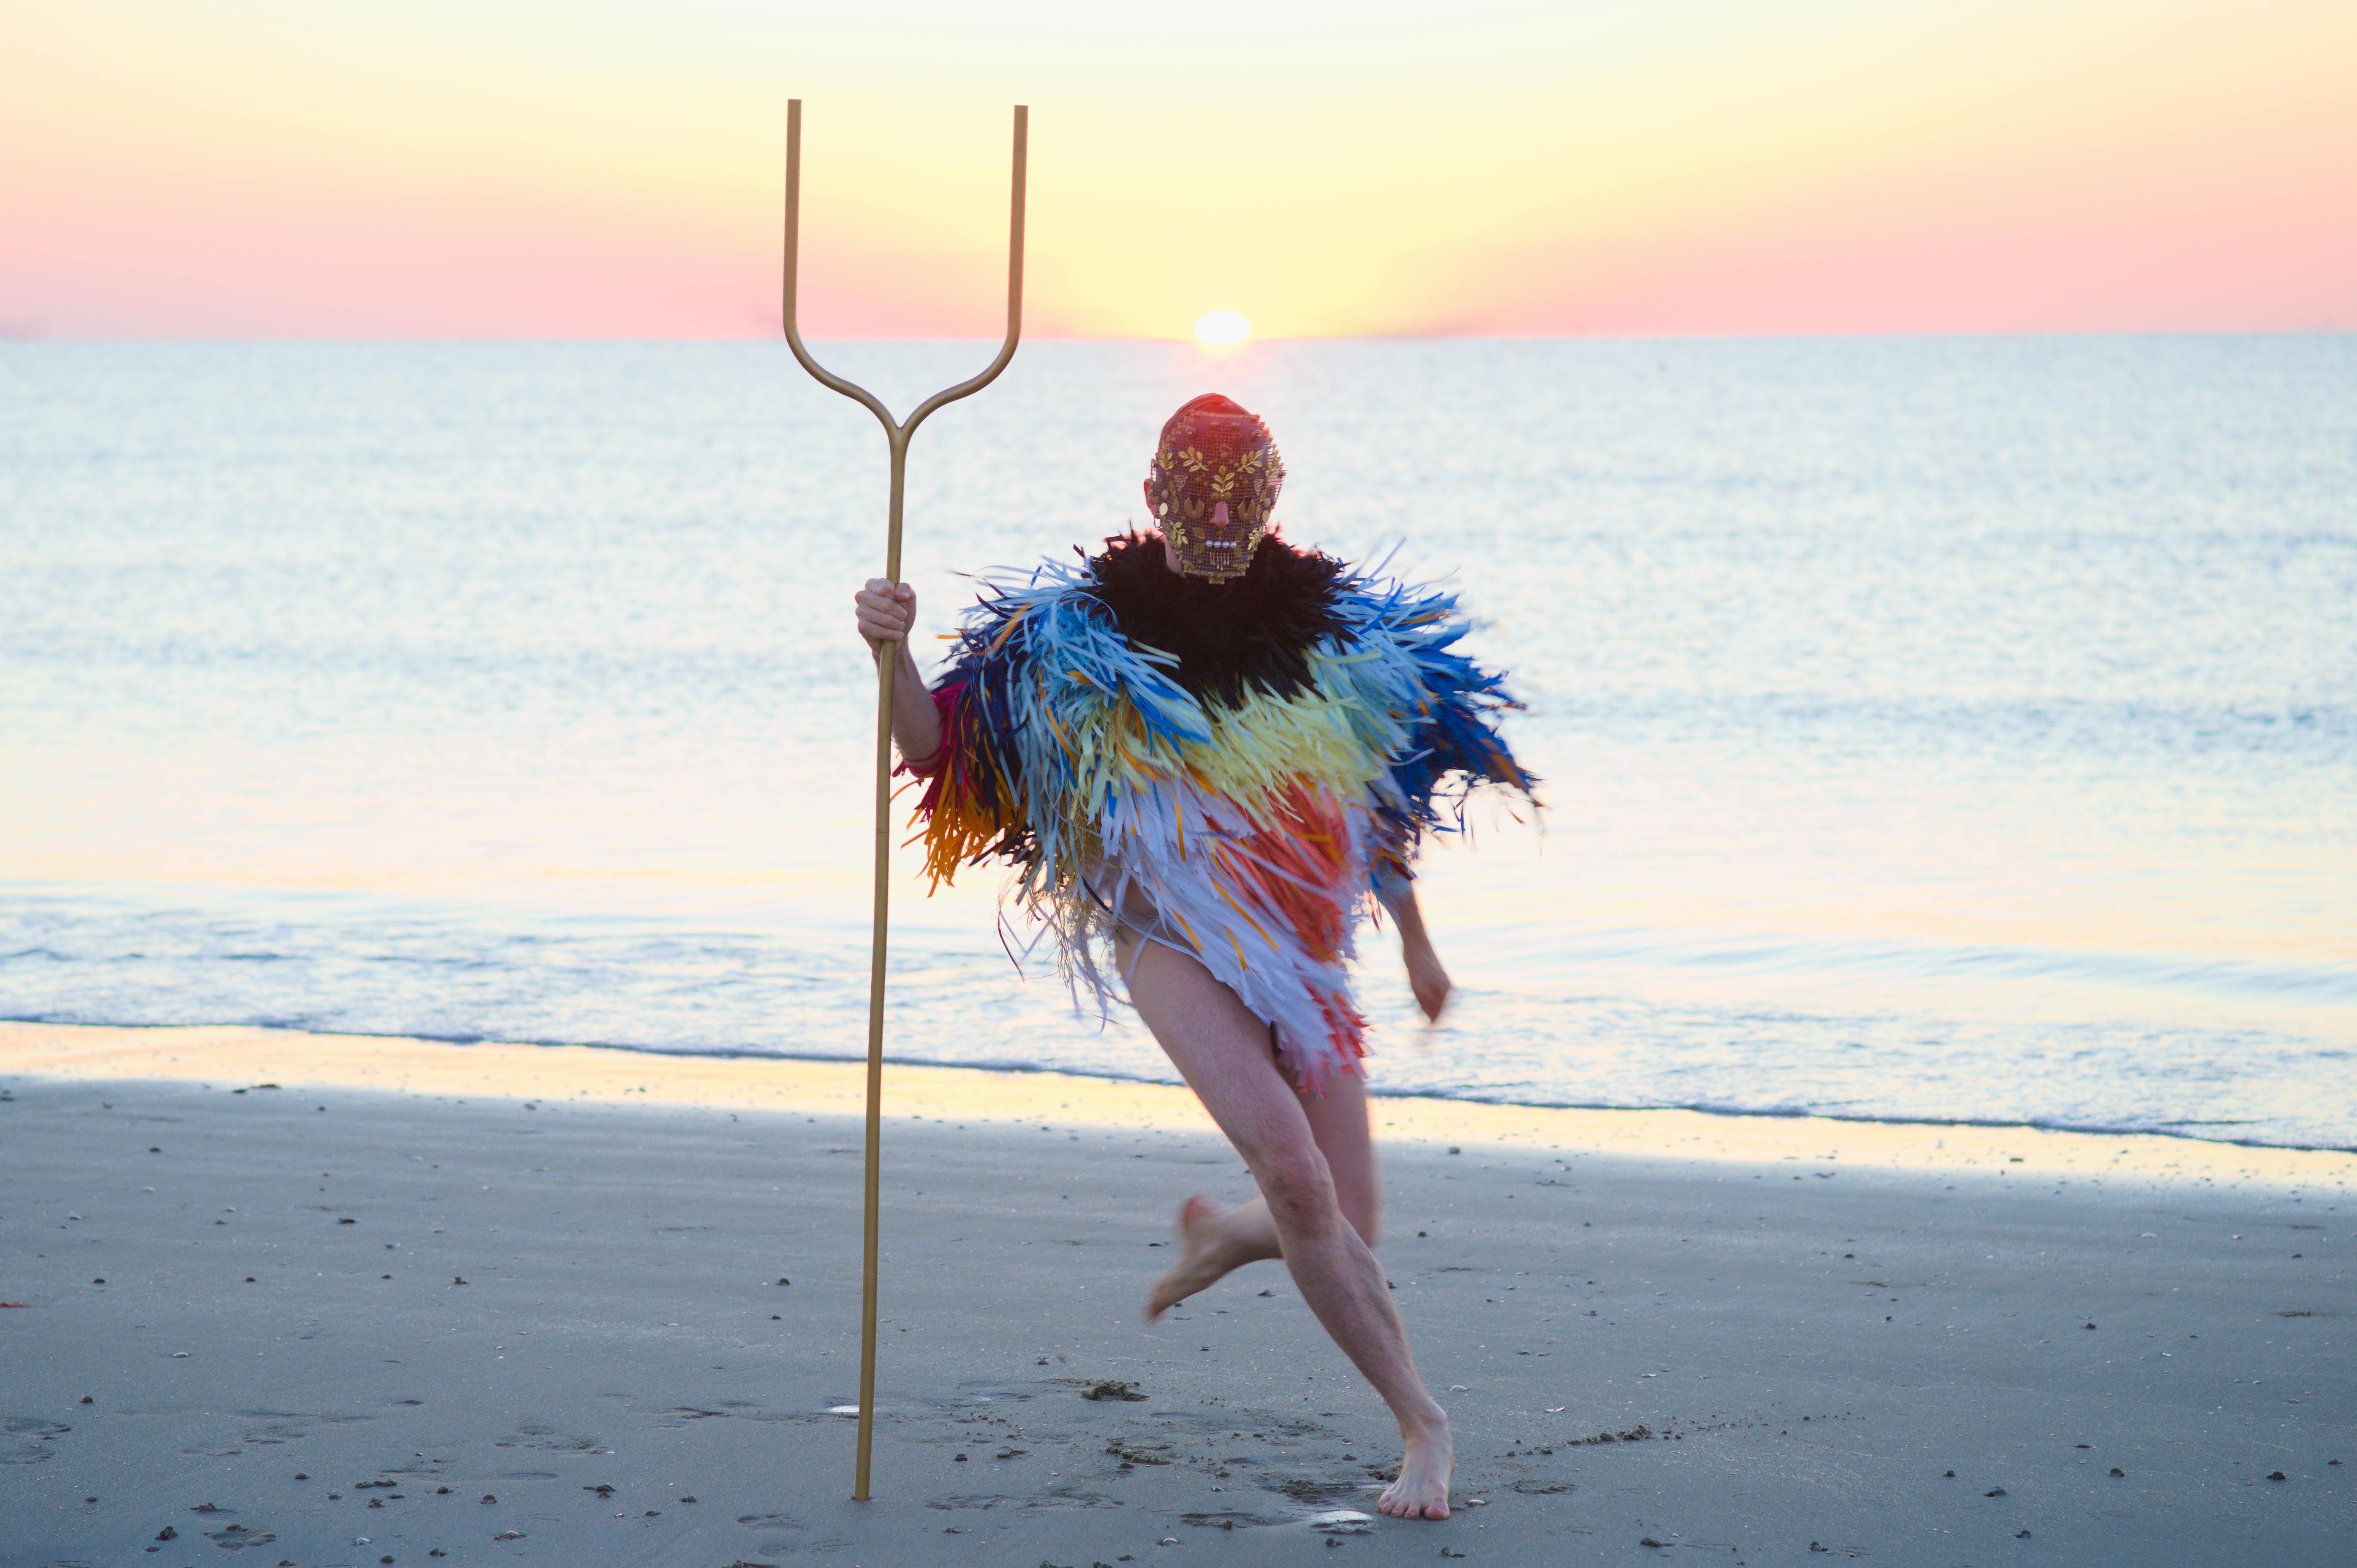 A human figure, wearing a mask and a poncho made of thin colored strips, is running on a beach. In their hand they holds a kind of two-pronged pitchfork.